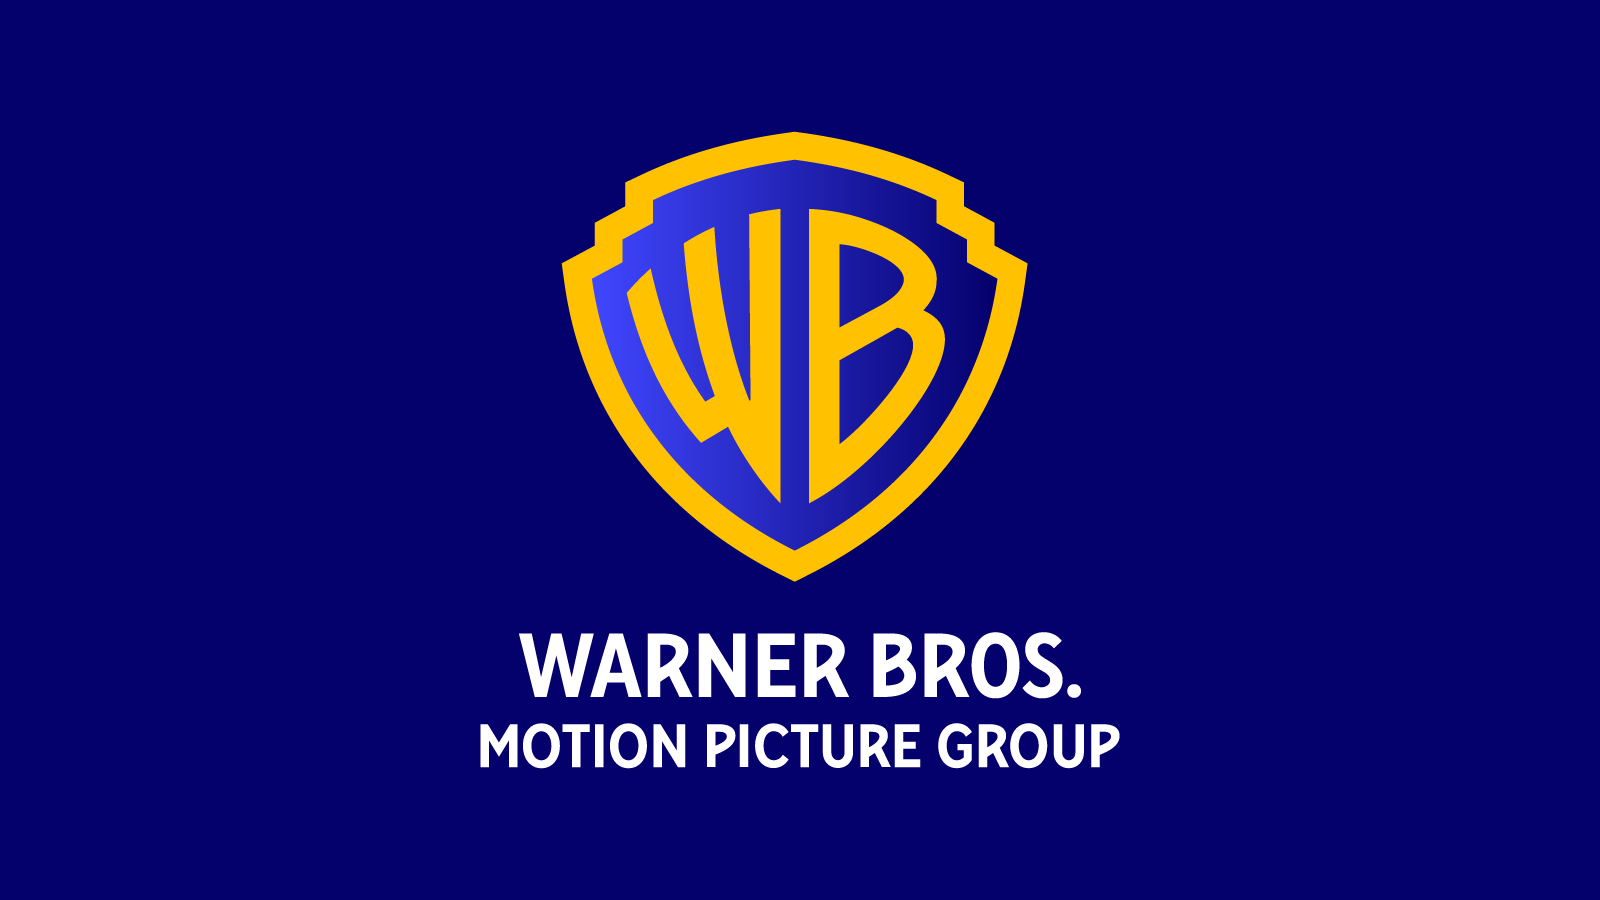 Warner Bros. Motion Picture Group And Tom Cruise To Jointly Develop And  Produce Original And Franchise Theatrical Films Starring Cruise Beginning  In 2024 Under Newly Formed Strategic Partnership